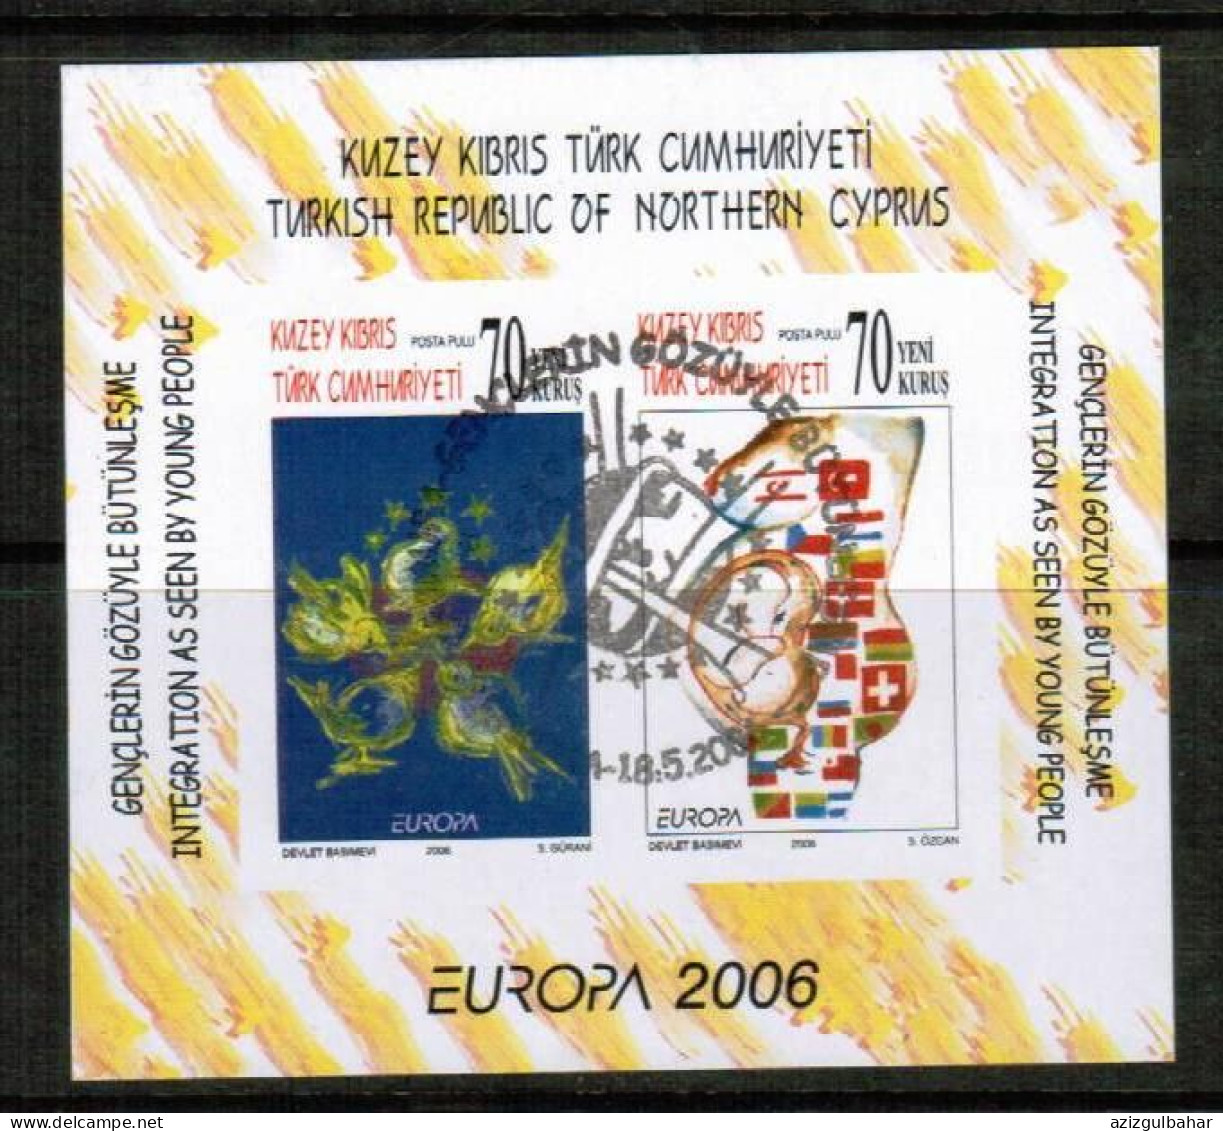 2006 - EUROPA  - INTEGRATION AS SEEN BY YOUR PEOPLE -  TURKISH CYPRIOT STAMPS - USED BLOCK - Usados